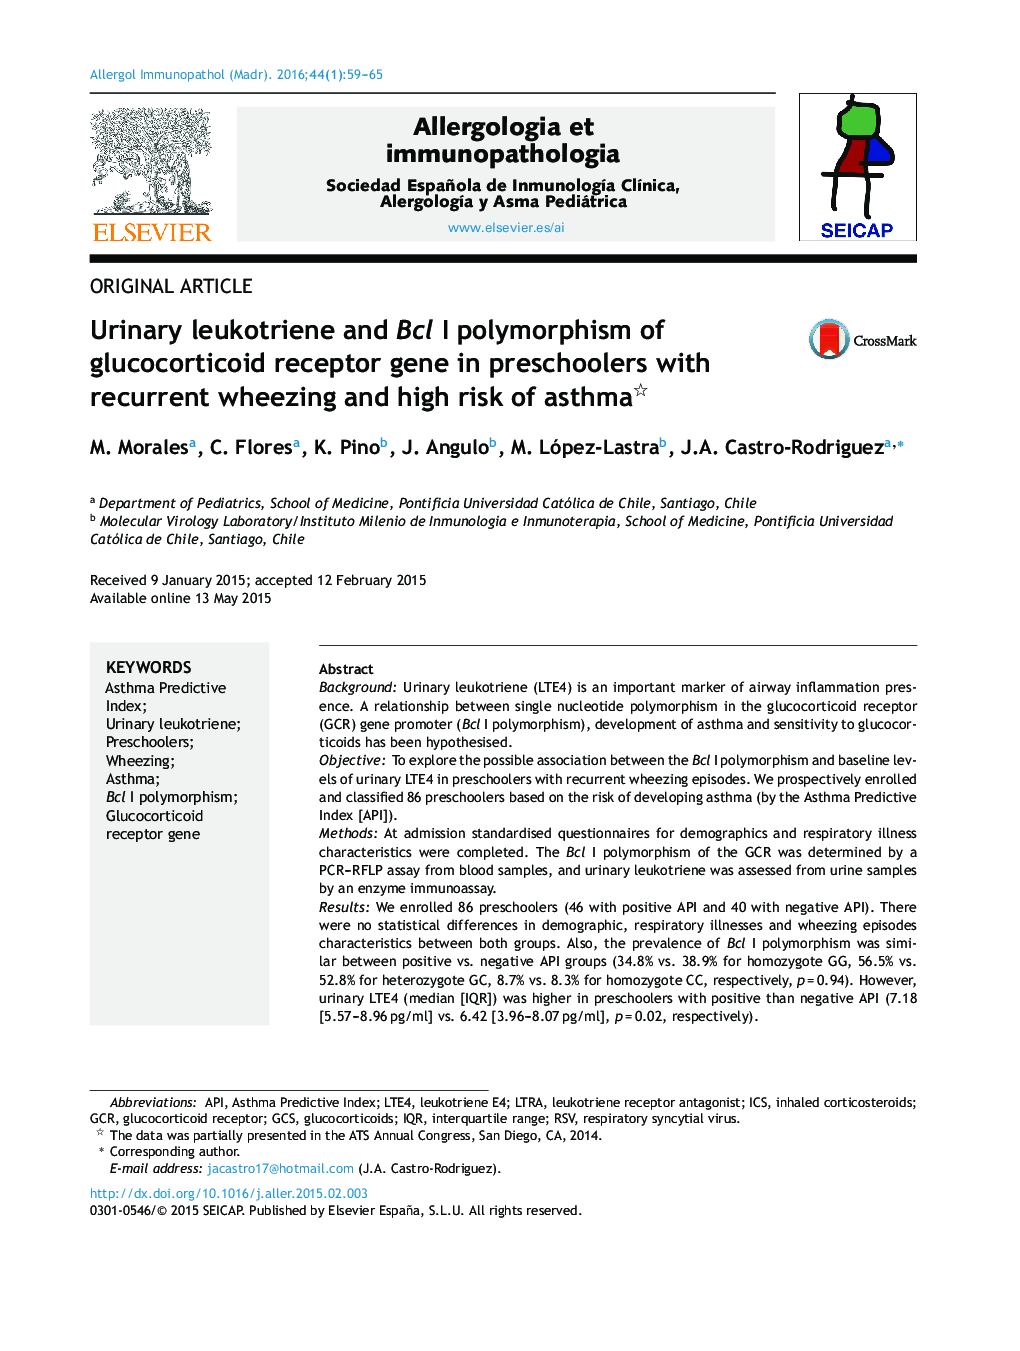 Urinary leukotriene and Bcl I polymorphism of glucocorticoid receptor gene in preschoolers with recurrent wheezing and high risk of asthma 